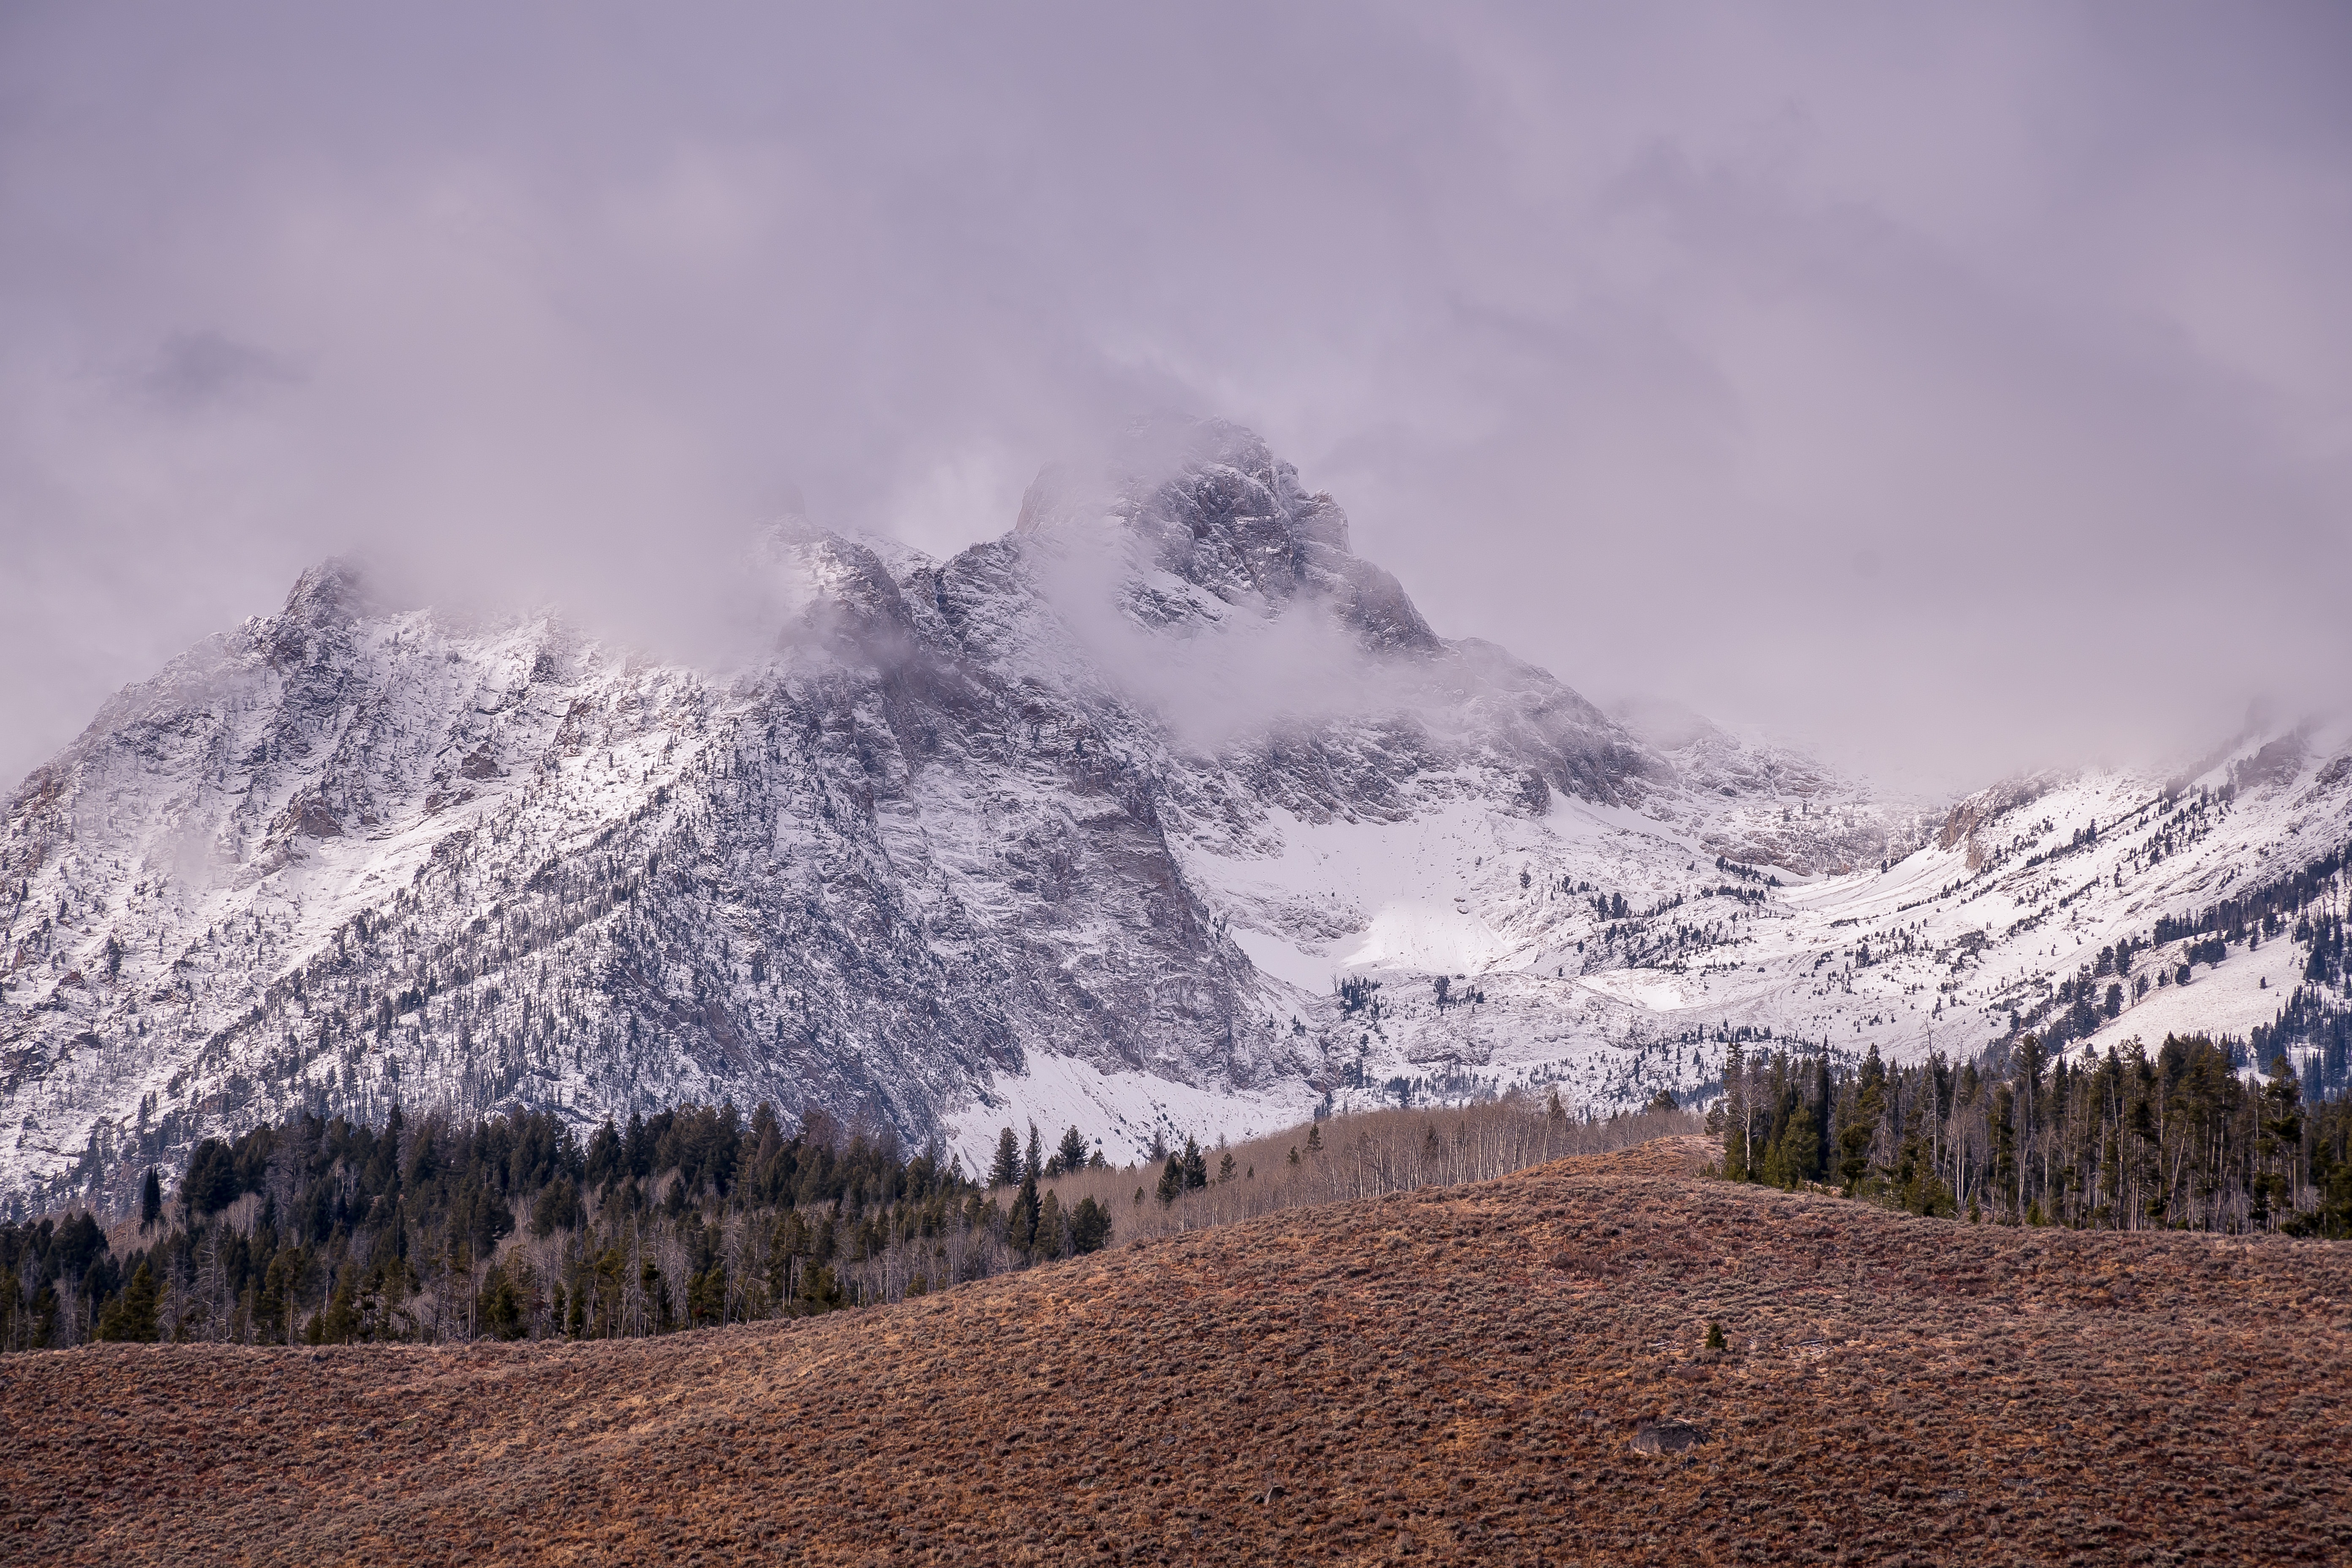 Photo of a snowy mountain under gray clouds